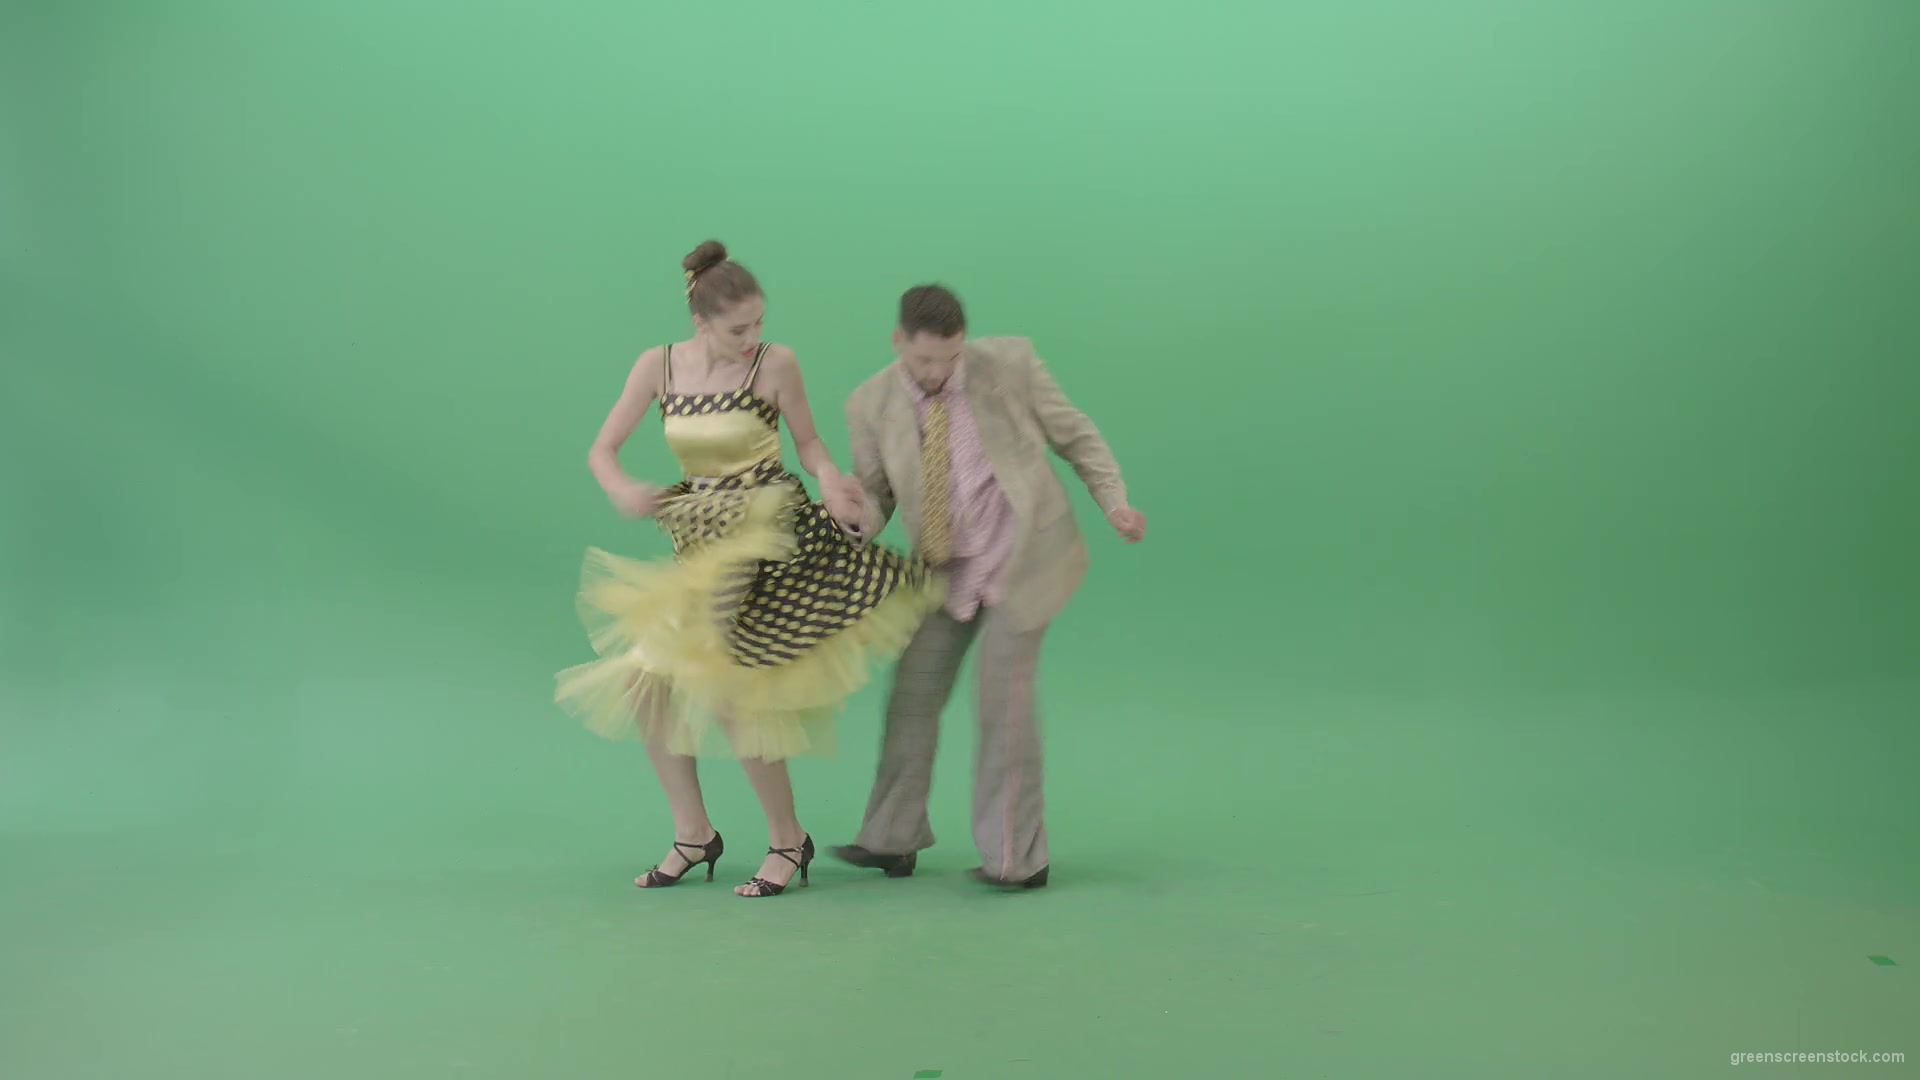 vj video background Happy-Man-and-woman-dancing-Boogie-woogie-moves-and-rock-and-roll-over-Green-Screen-4K-Video-Footage-1920_003